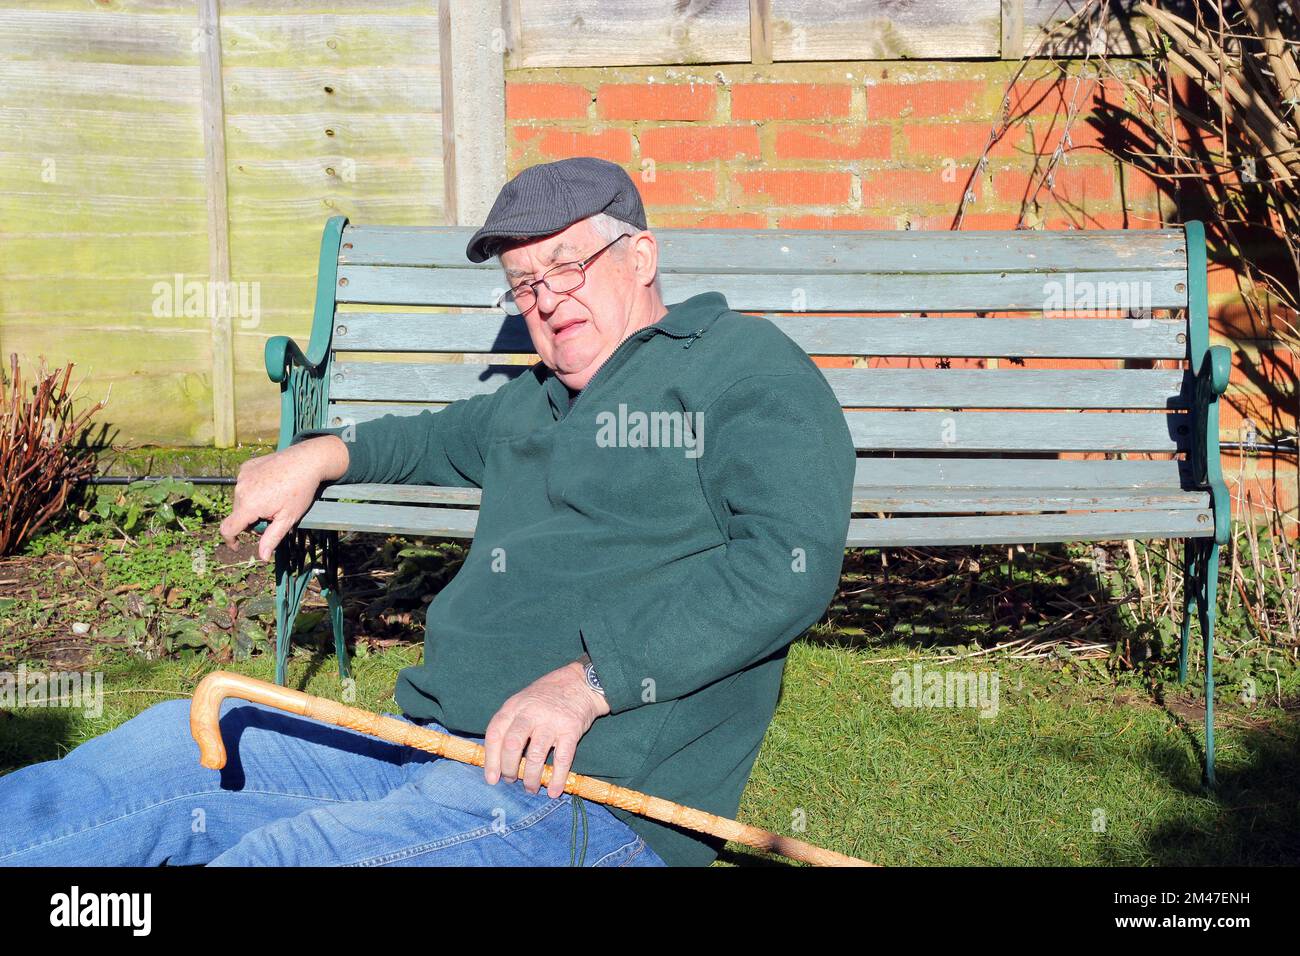 Old or elderly man fallen over. Sitting on the ground. Stock Photo